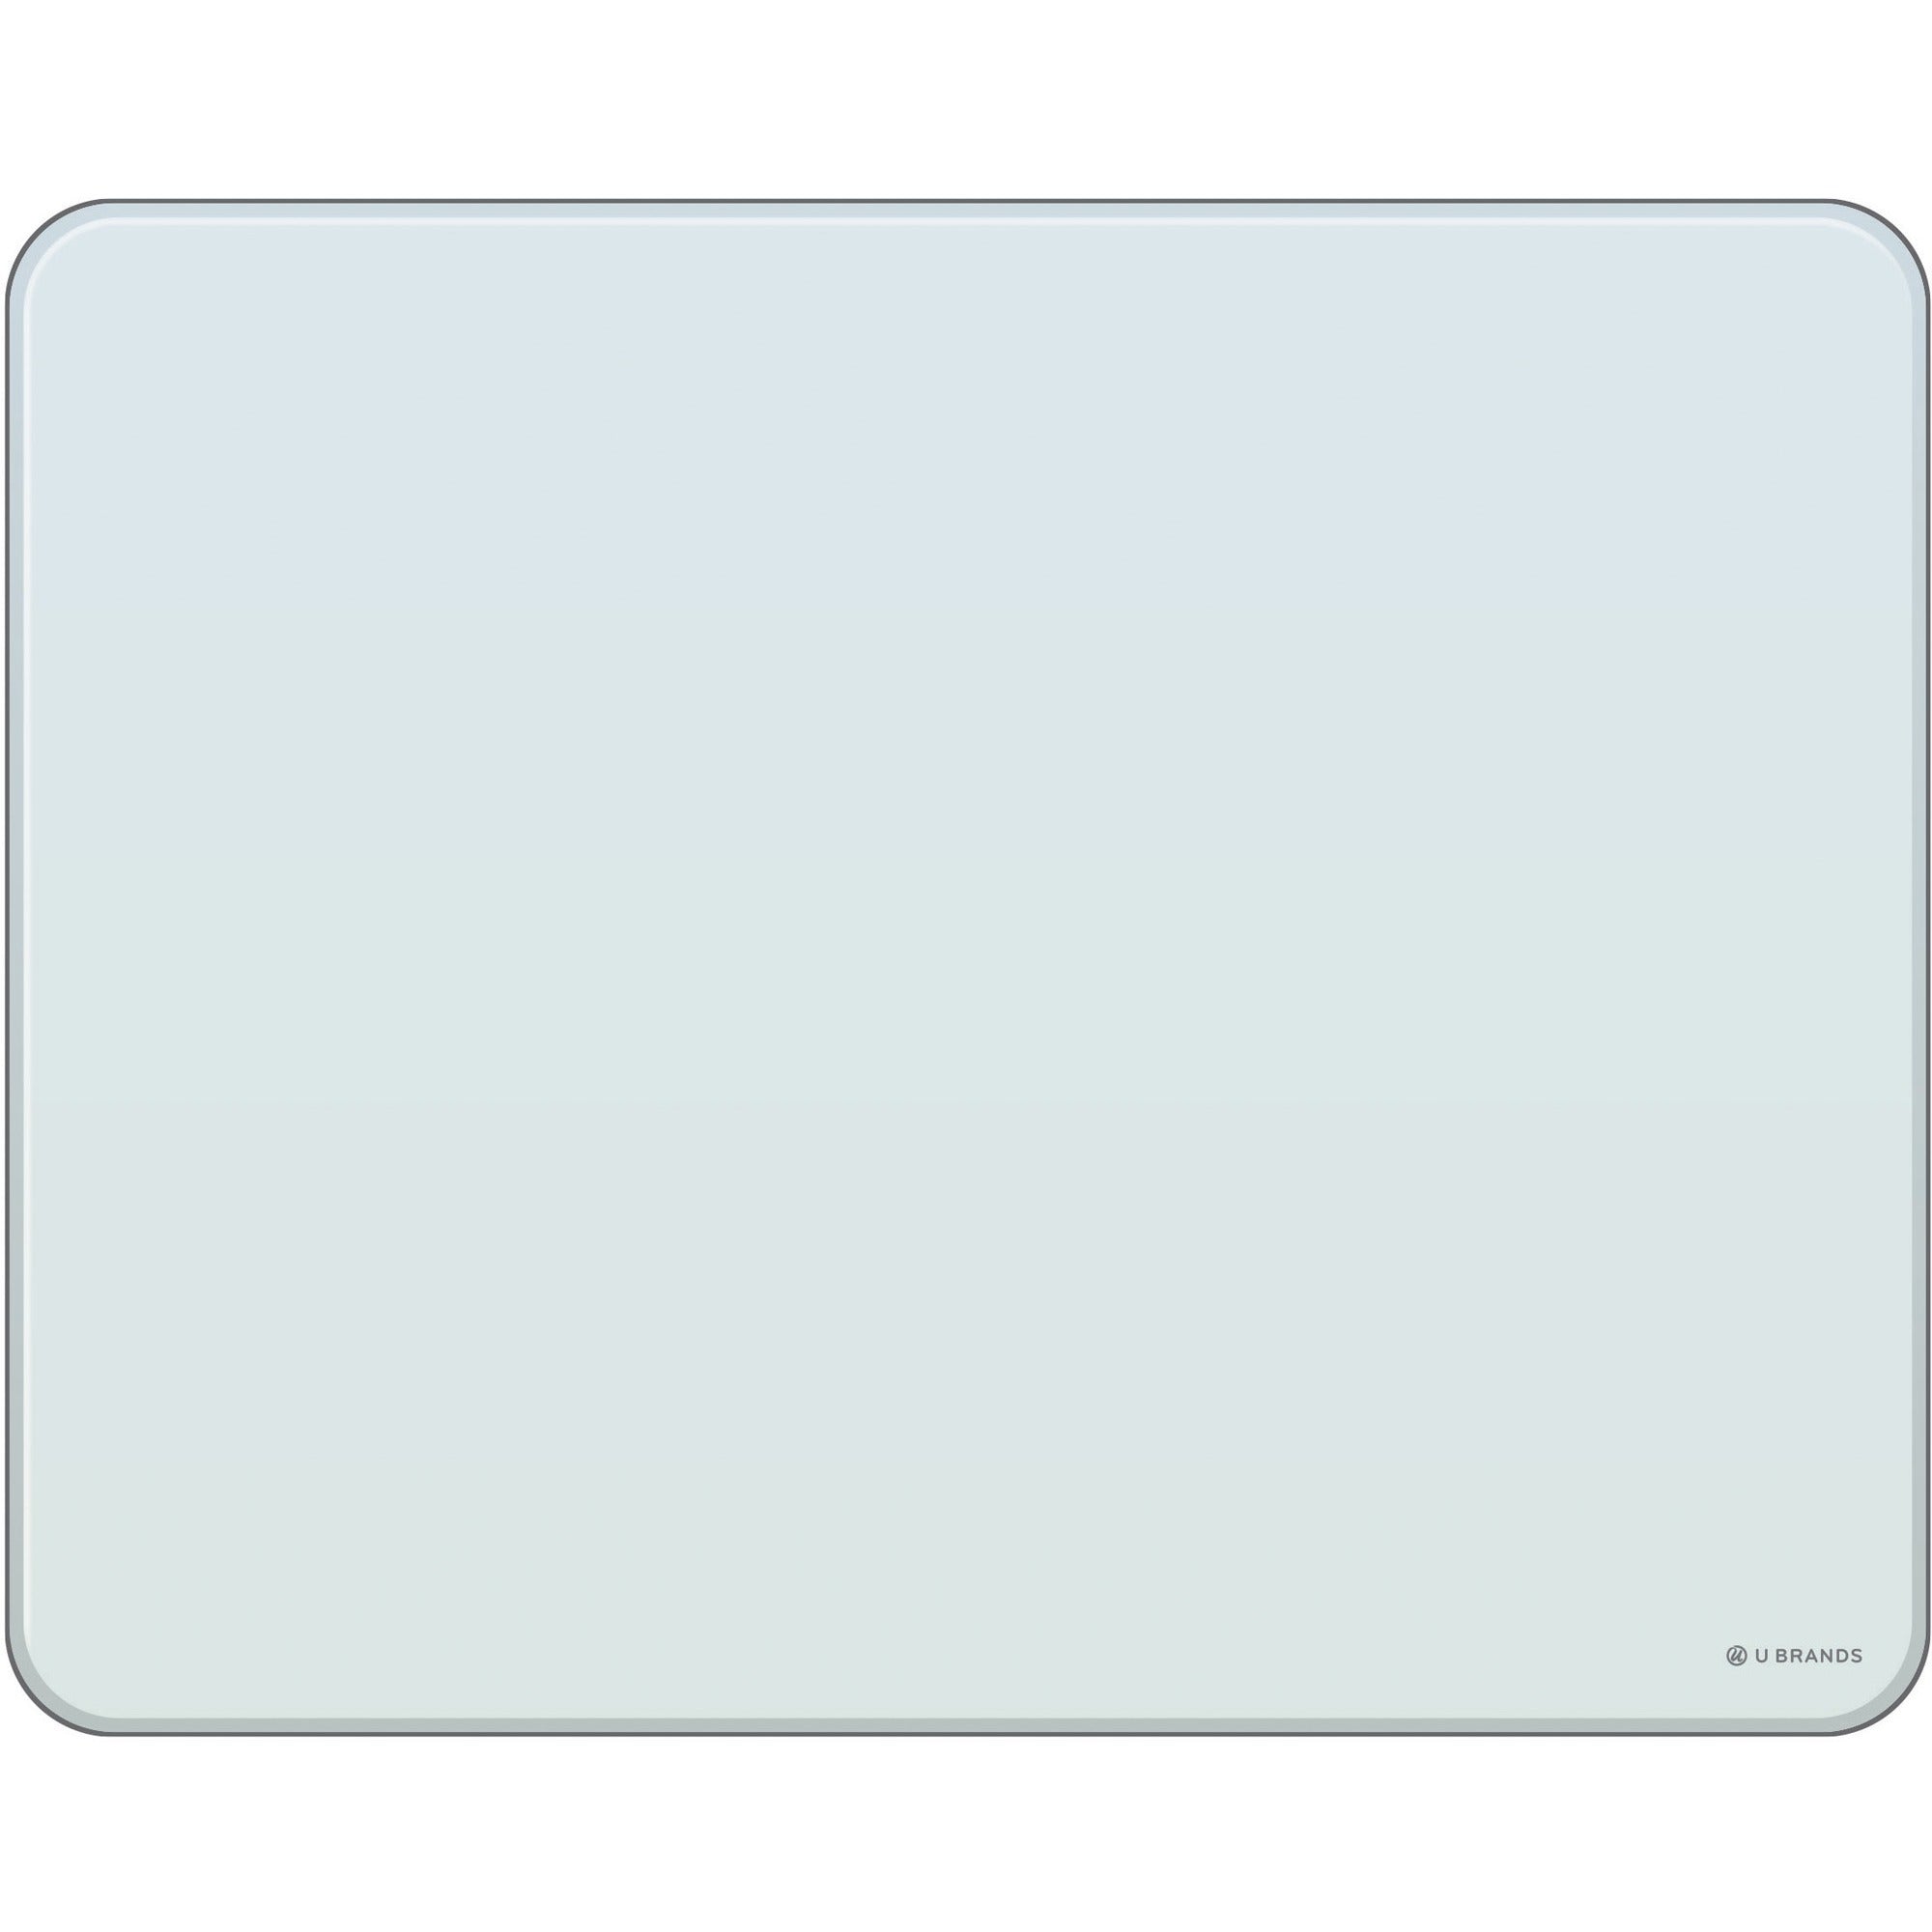 u-brands-frosted-glass-dry-erase-board-16-13-ft-width-x-20-17-ft-height-frosted-white-tempered-glass-surface-rectangle-horizontal-magnetic-1-each_ubr3032u0001 - 1